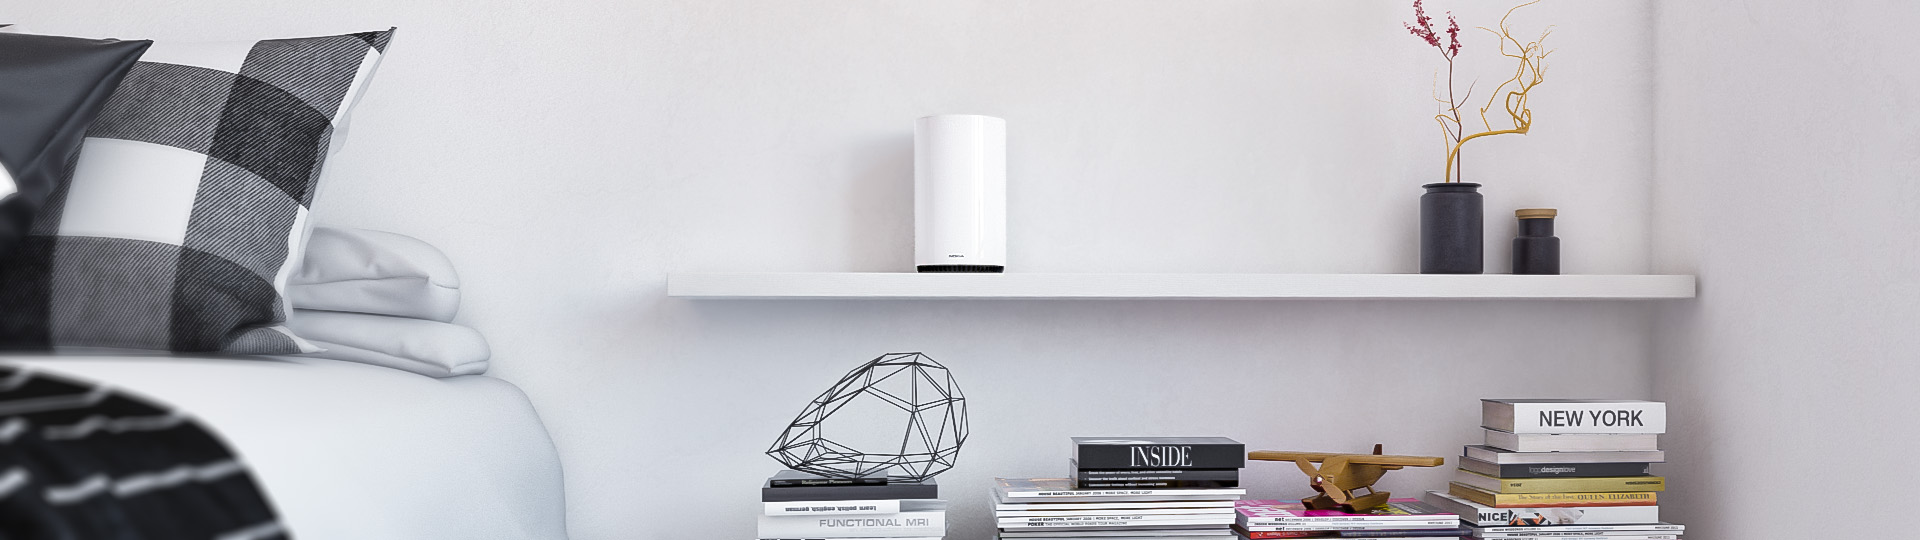 photo of Nokia acquires Unium, a mesh WiFi startup that works with Google Fiber, as part of big home WiFi push image